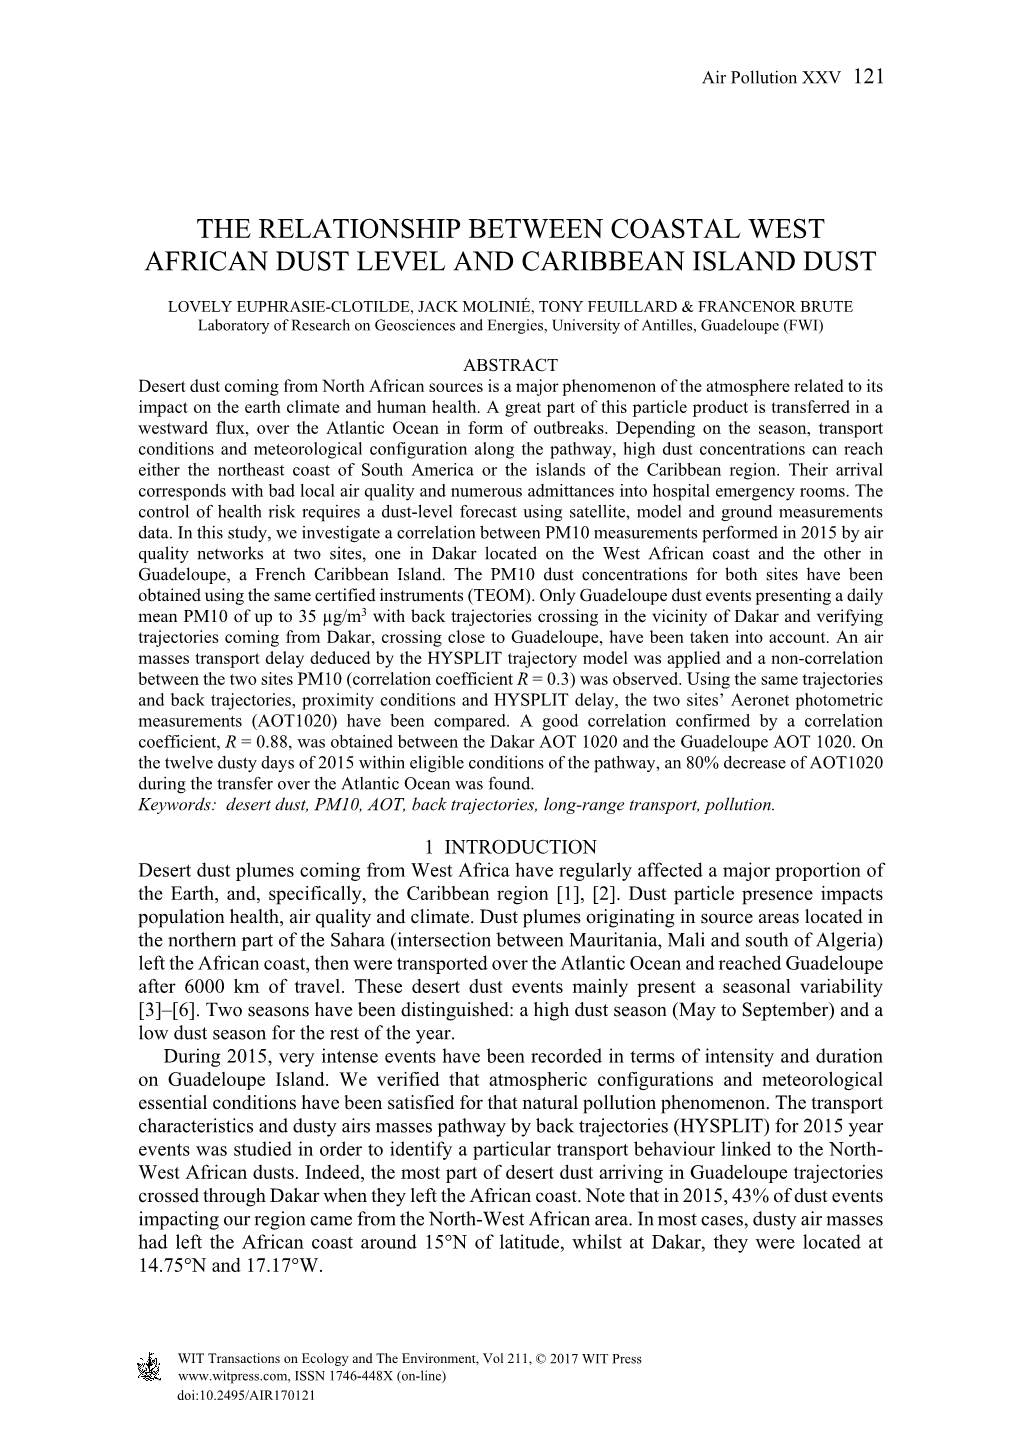 The Relationship Between Coastal West African Dust Level and Caribbean Island Dust